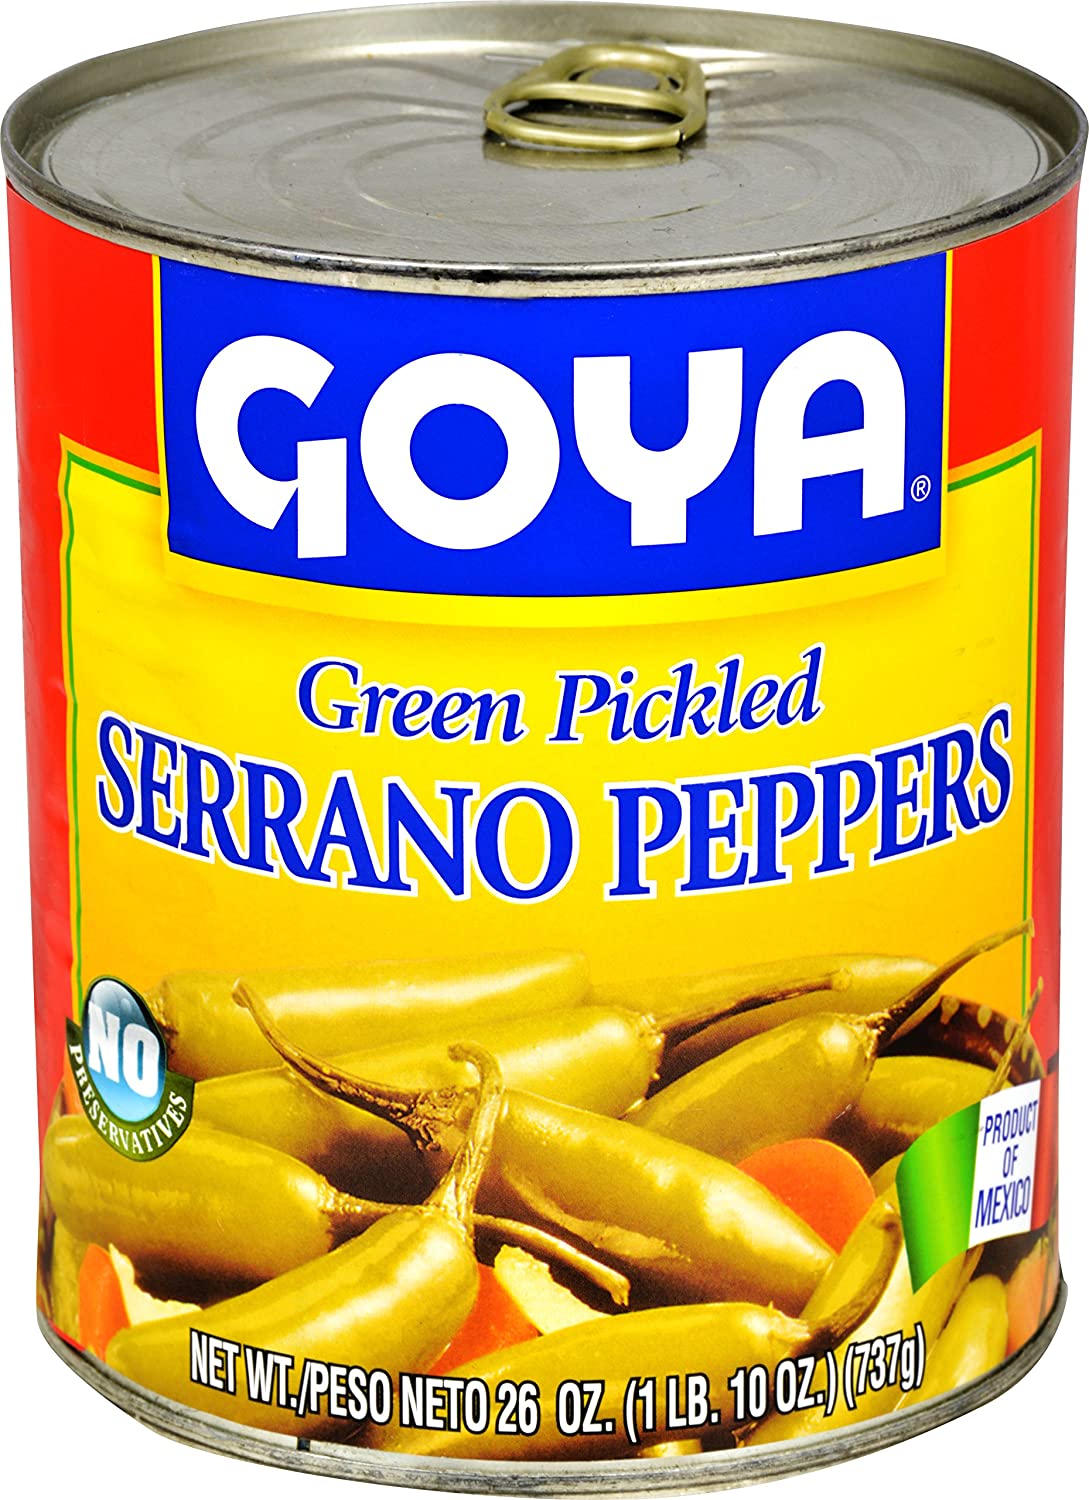 Pickled Serrano Peppers